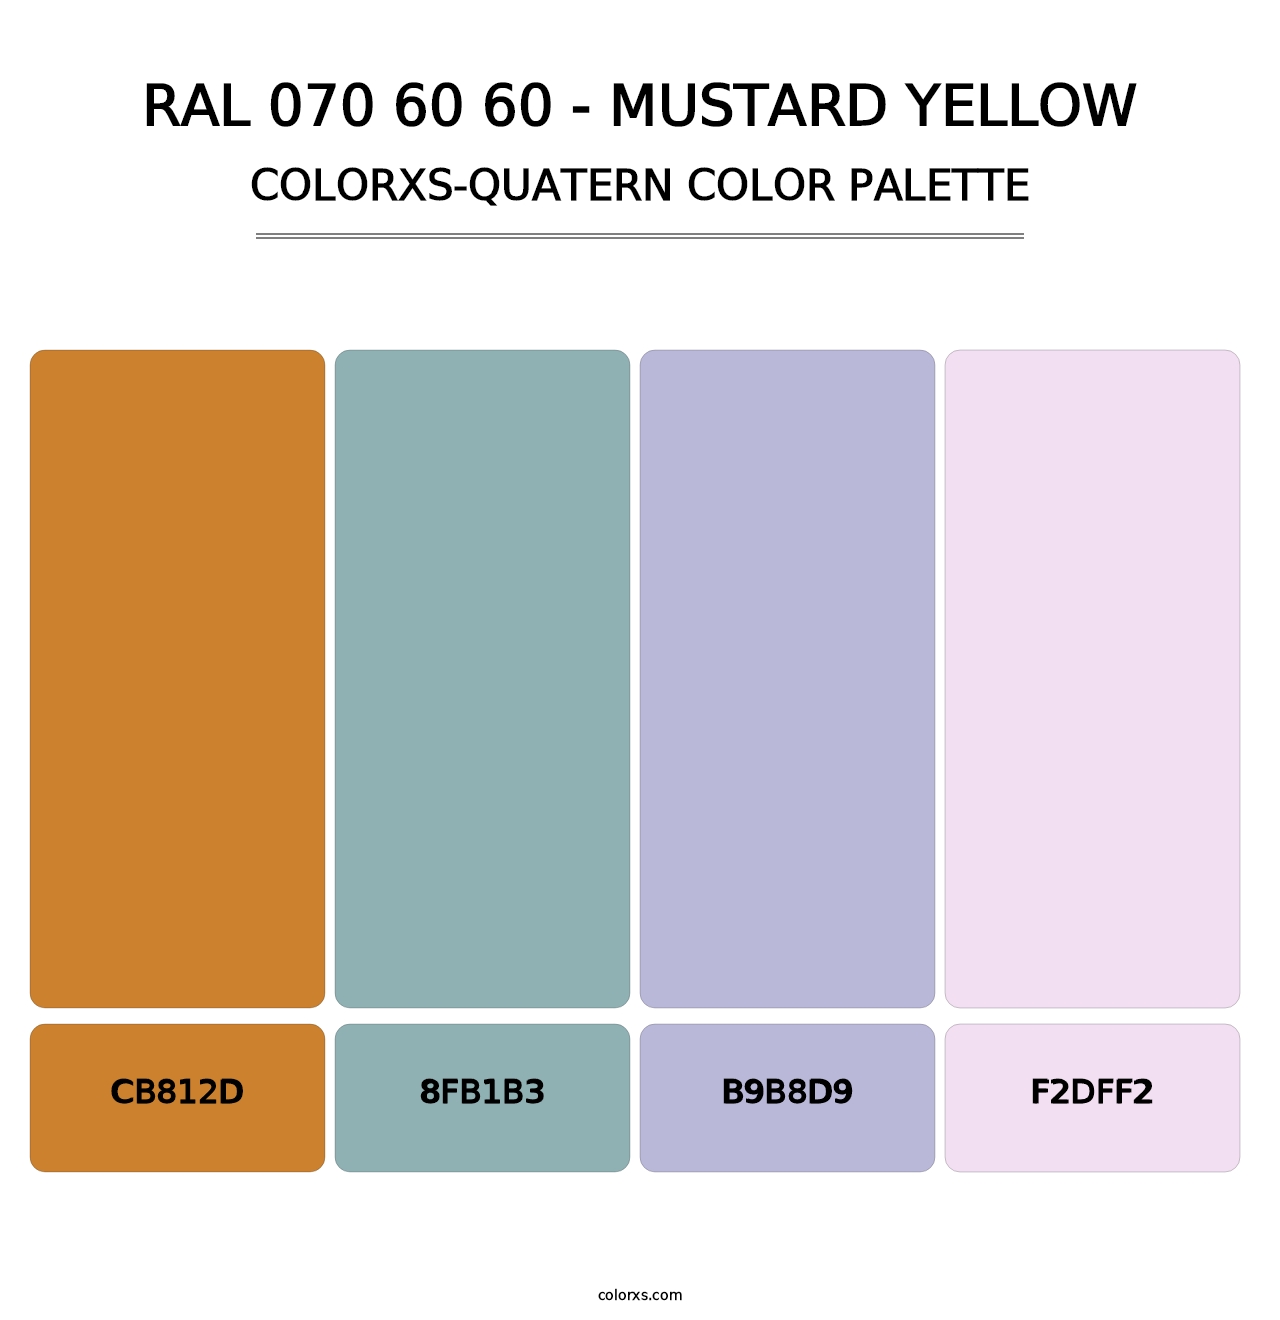 RAL 070 60 60 - Mustard Yellow - Colorxs Quatern Palette